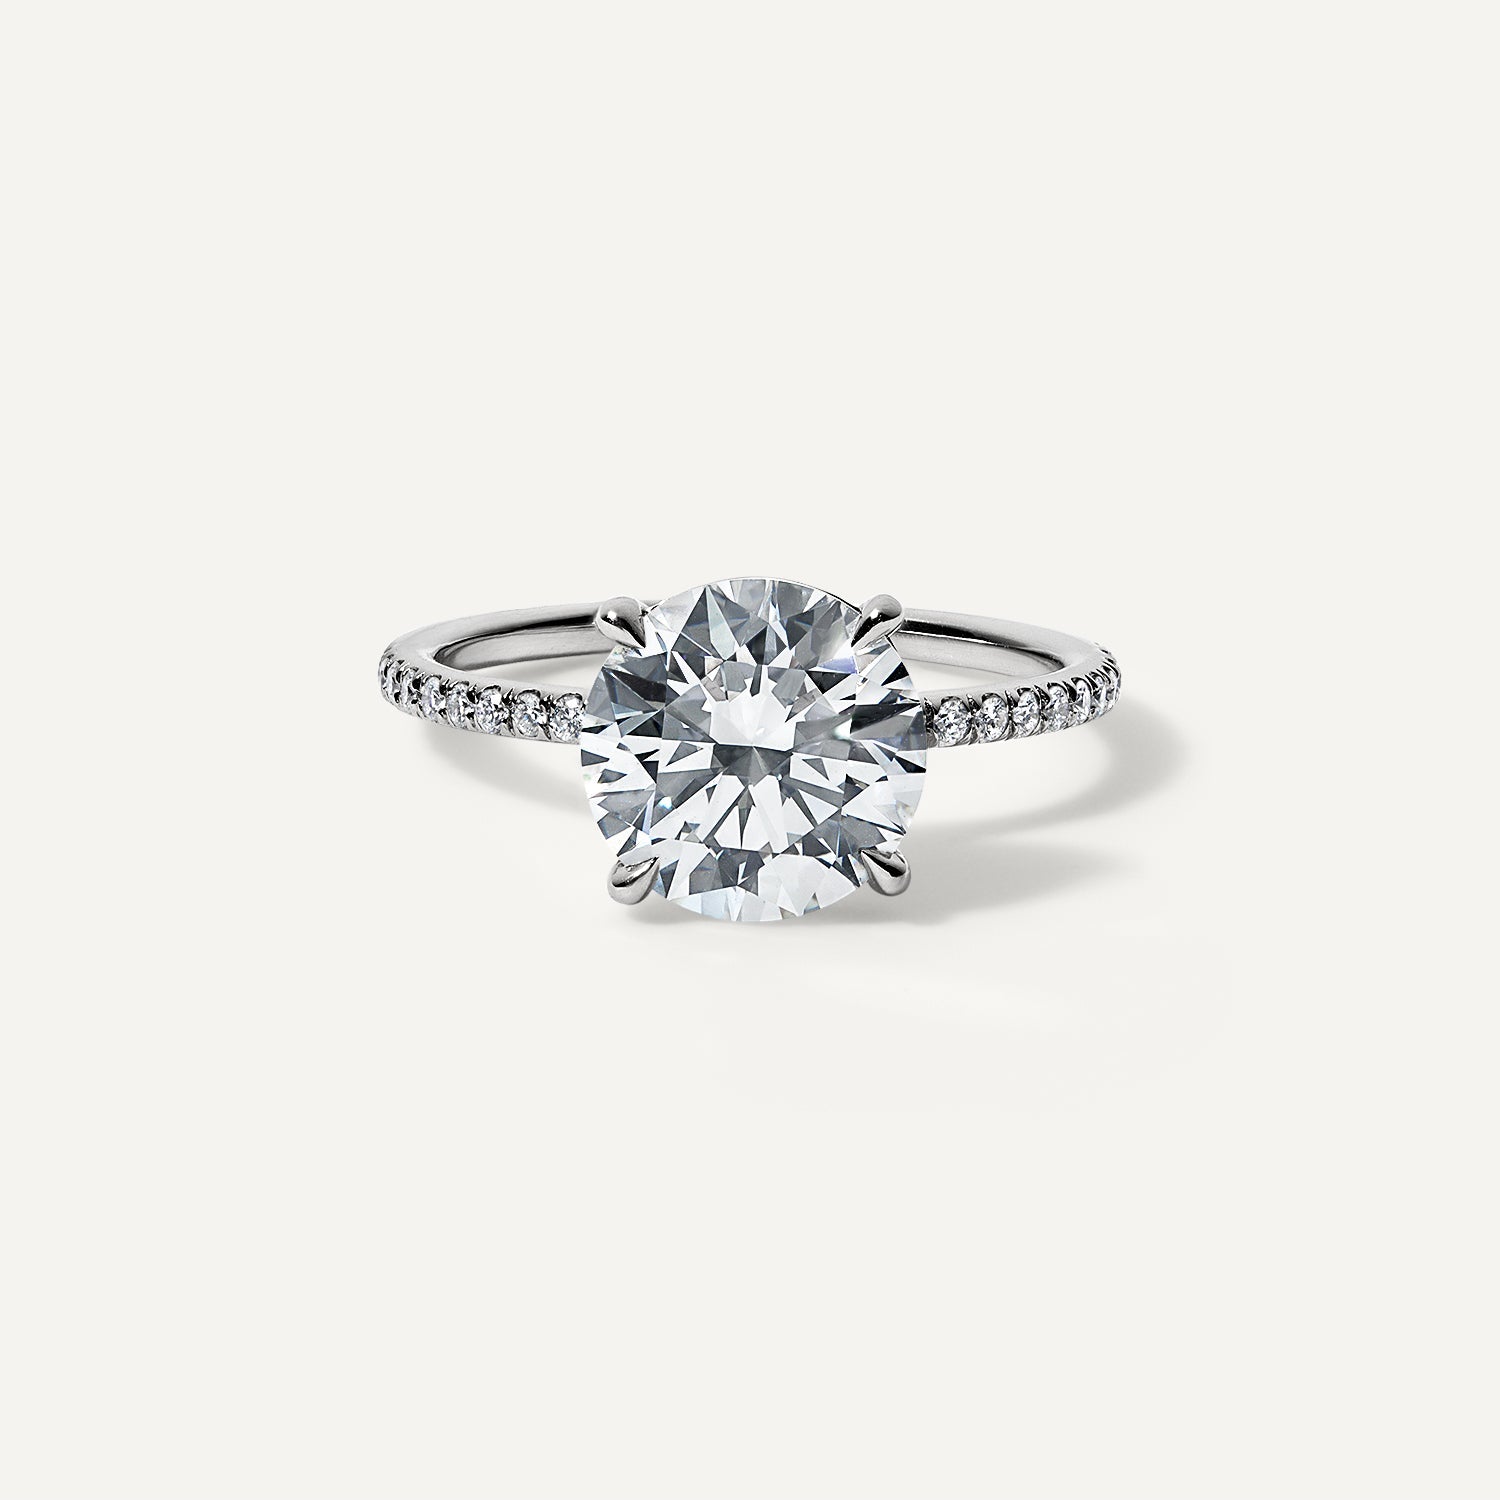 Round lab diamond engagement ring with pave band.